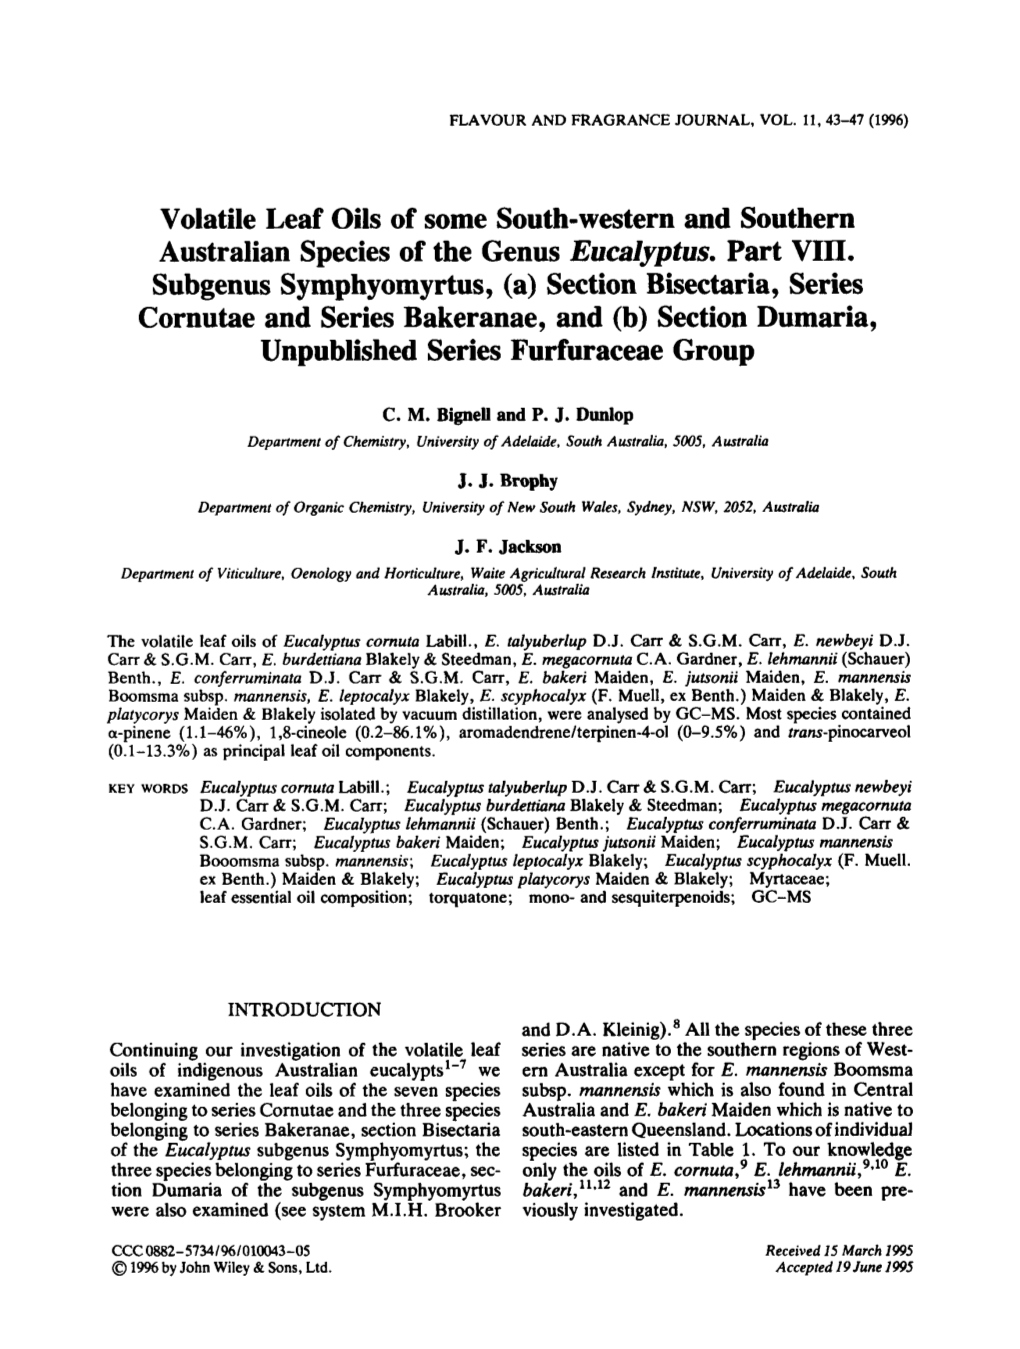 Volatile Leaf Oils of Some South-Western and Southern Australian Species of the Genus Eucalyptus